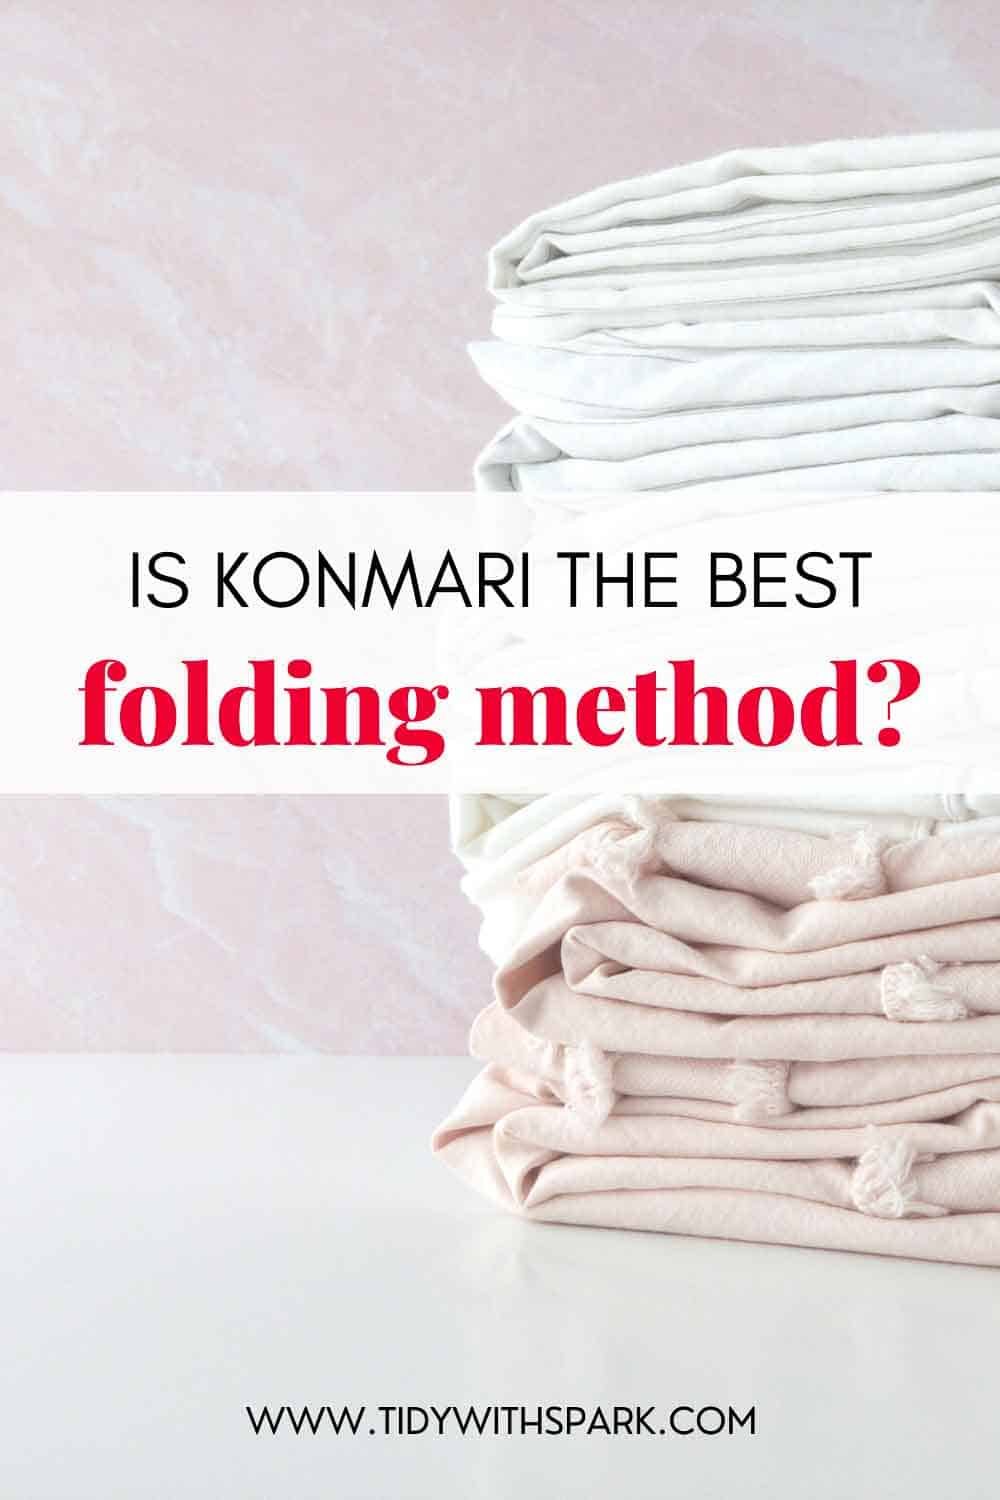 Promotional image for Folding clothes to save space post for tidy with spark blog